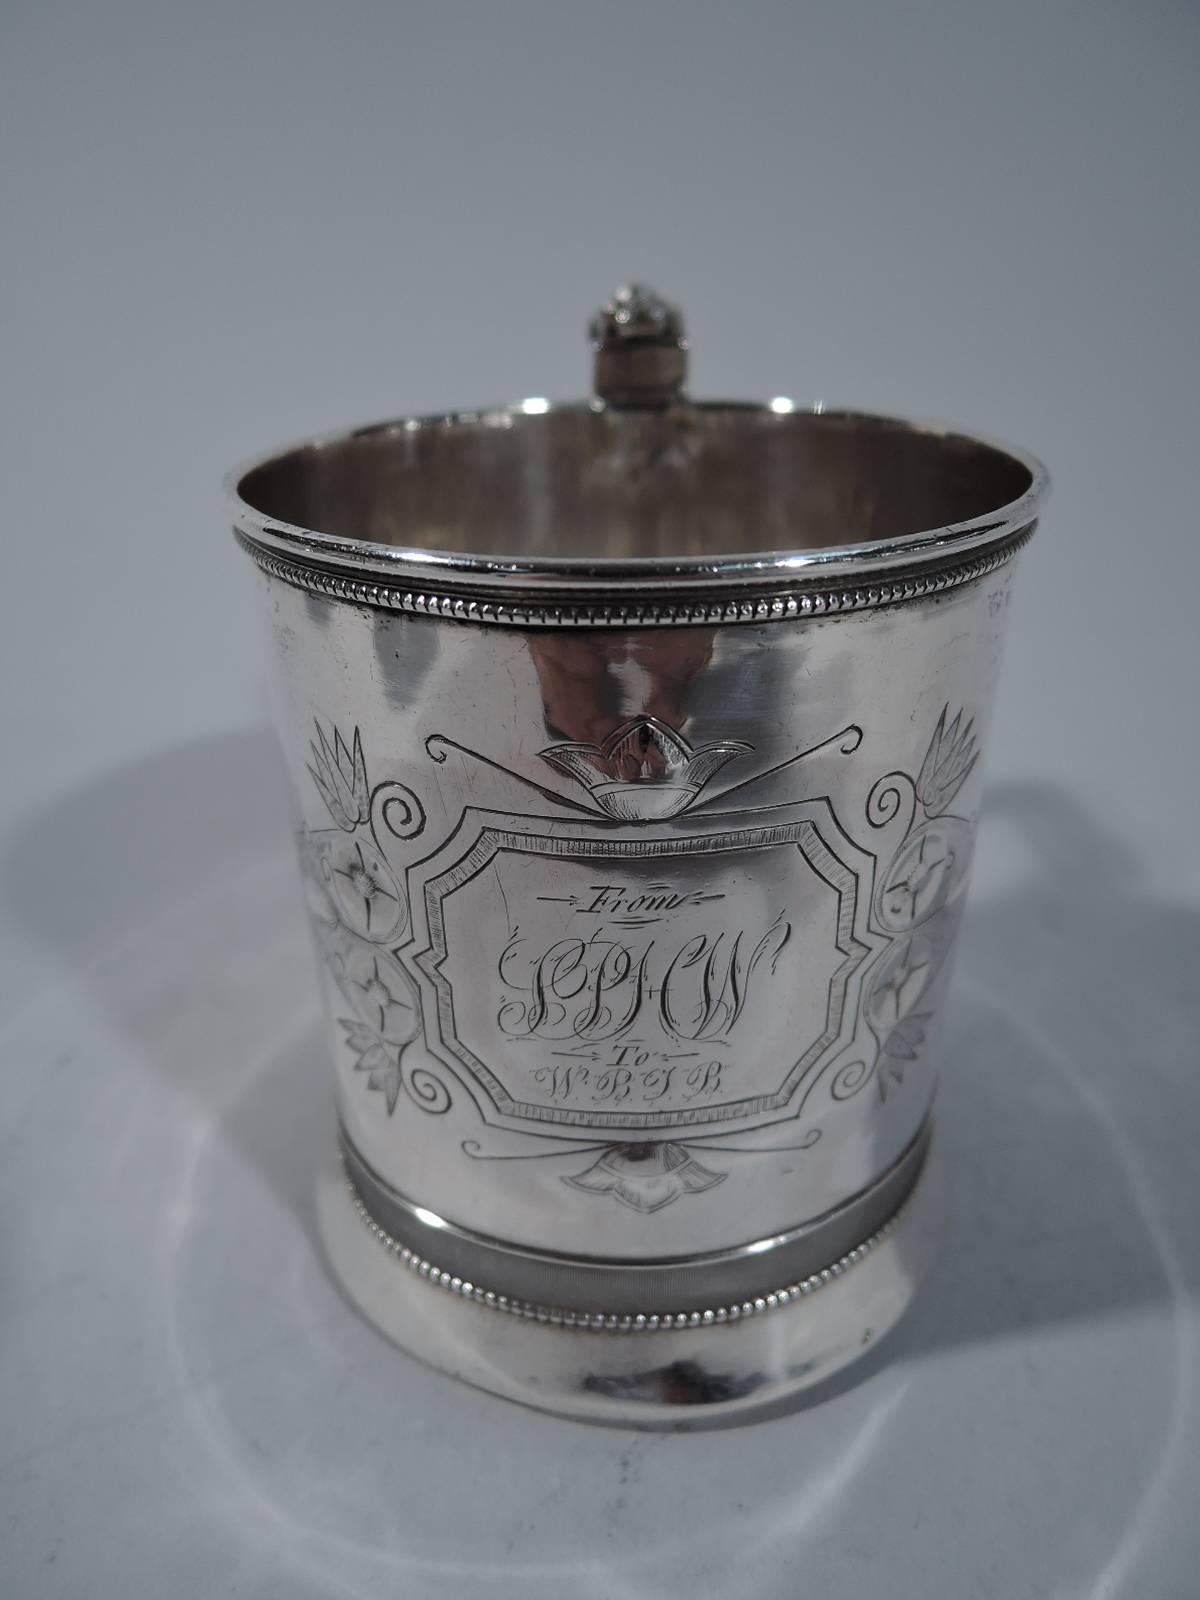 Coin silver christening mug. Made by Gorham in Providence, circa 1865. Straight sides, spread base, and scroll bracket handle with bug cap. Curvilinear frame surrounded by advanced stylized ornament. Script presentation engraved in frame. Beading